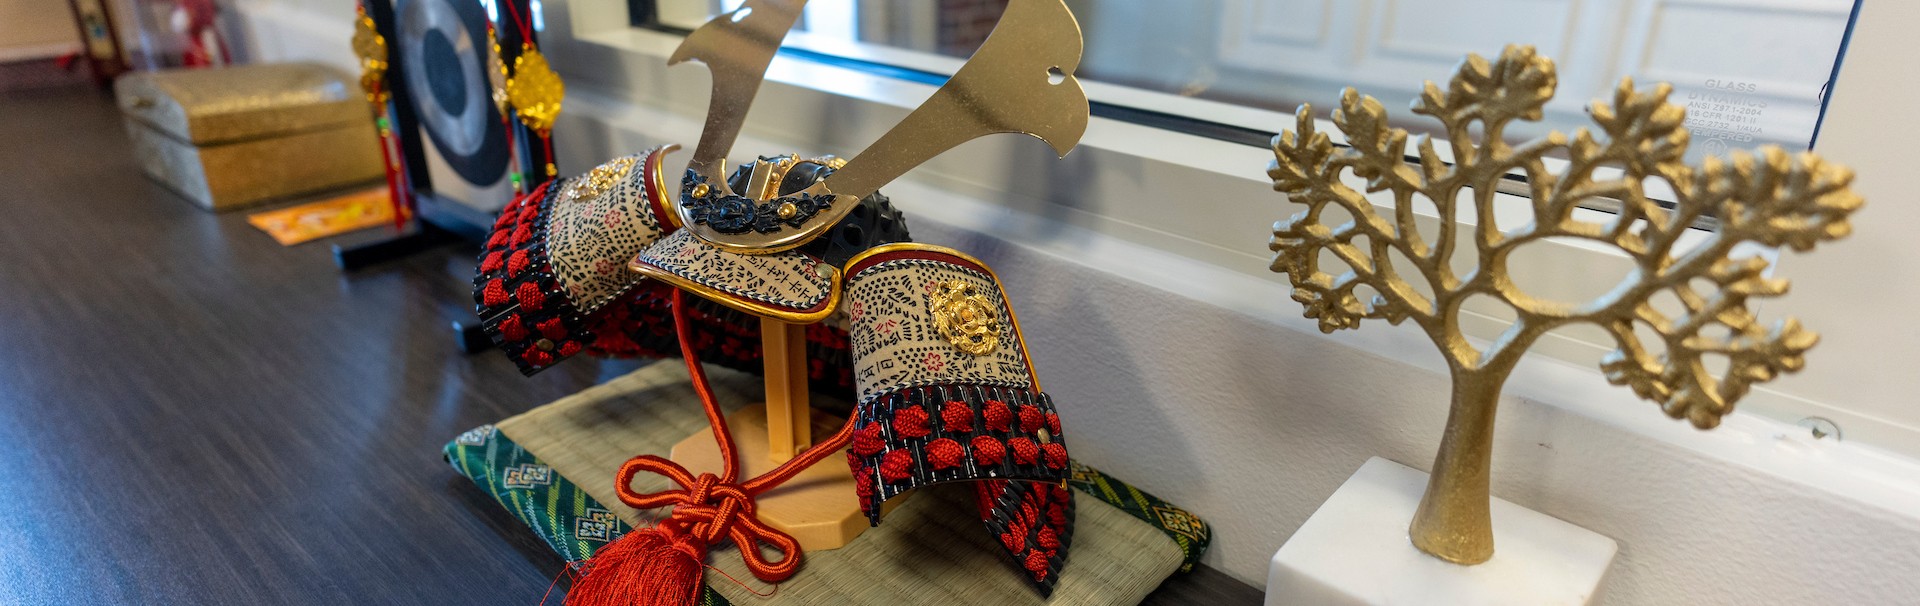 Asian Heritage Cultural Center artifacts on display